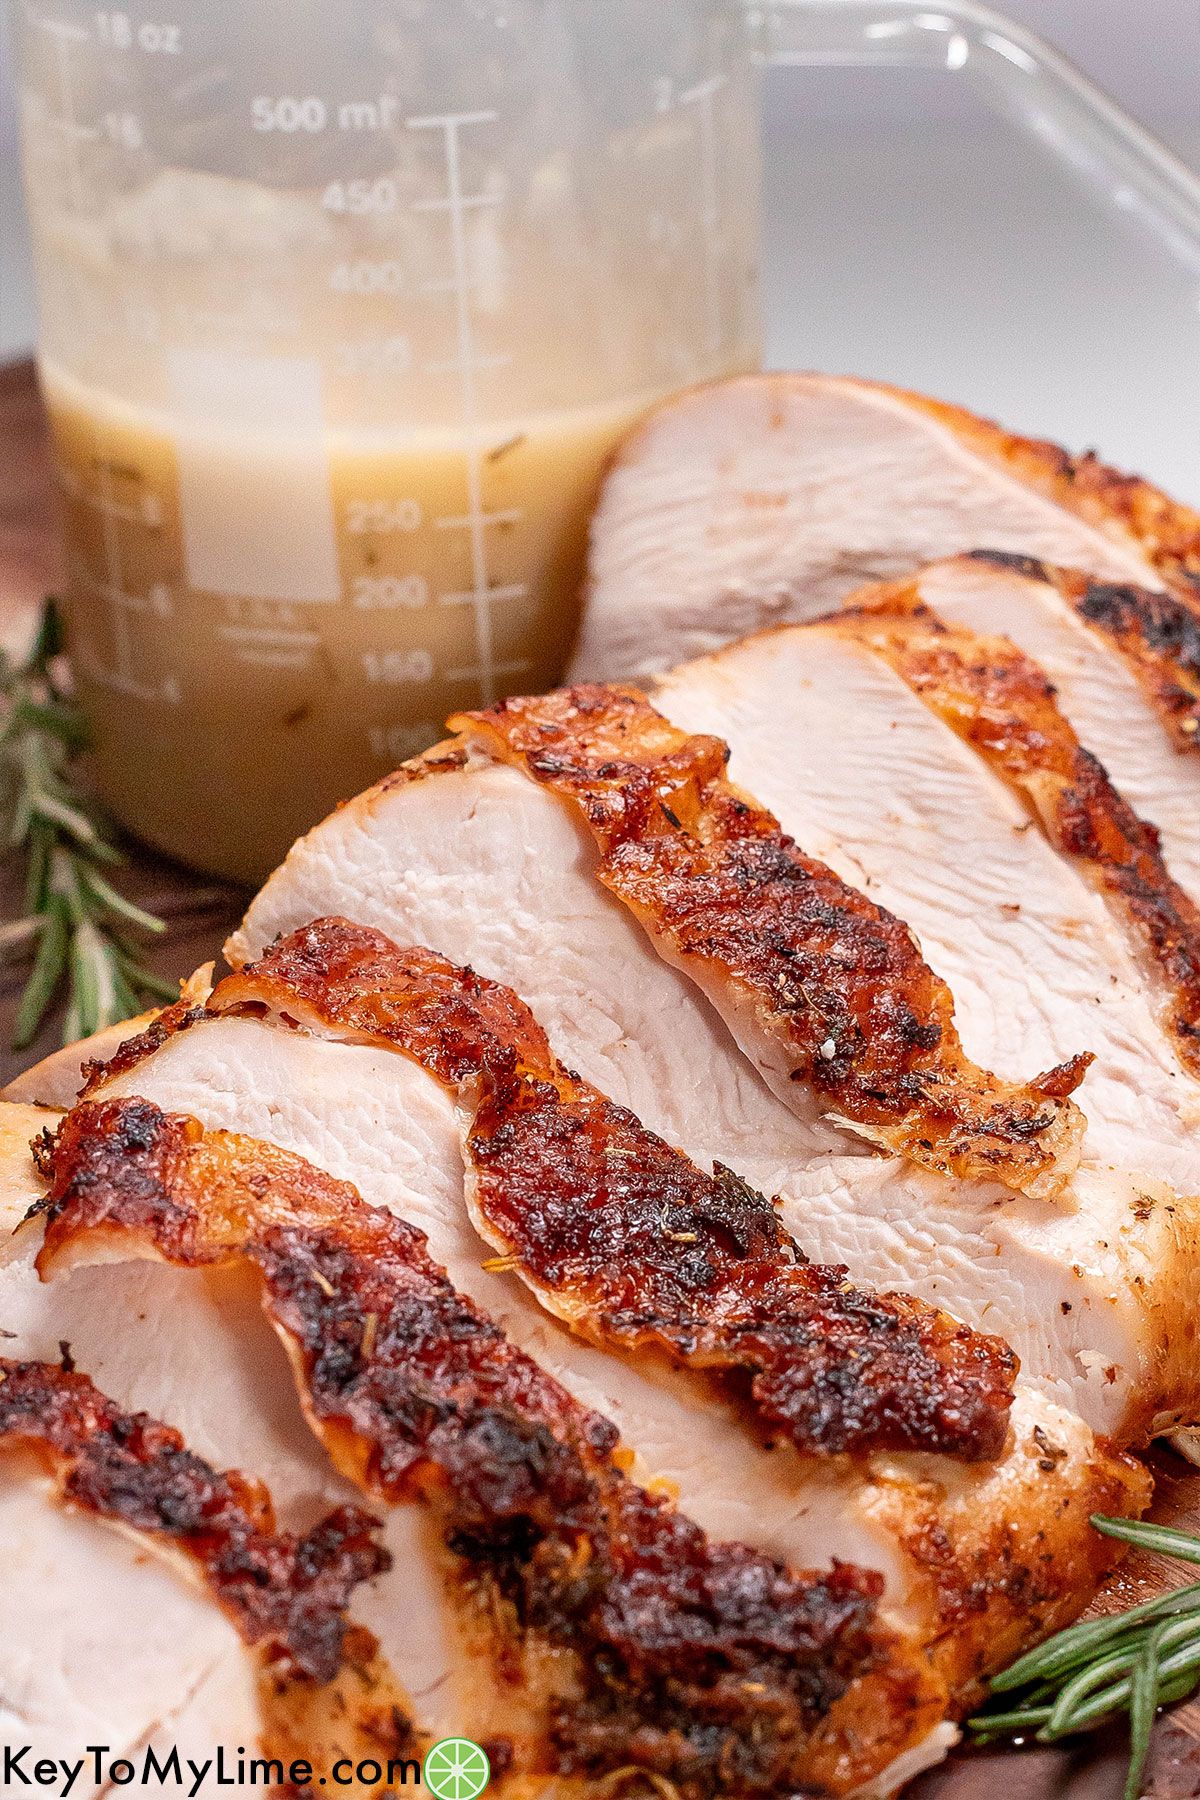 A side image showing the texture of the crispy skin on the turkey breast.